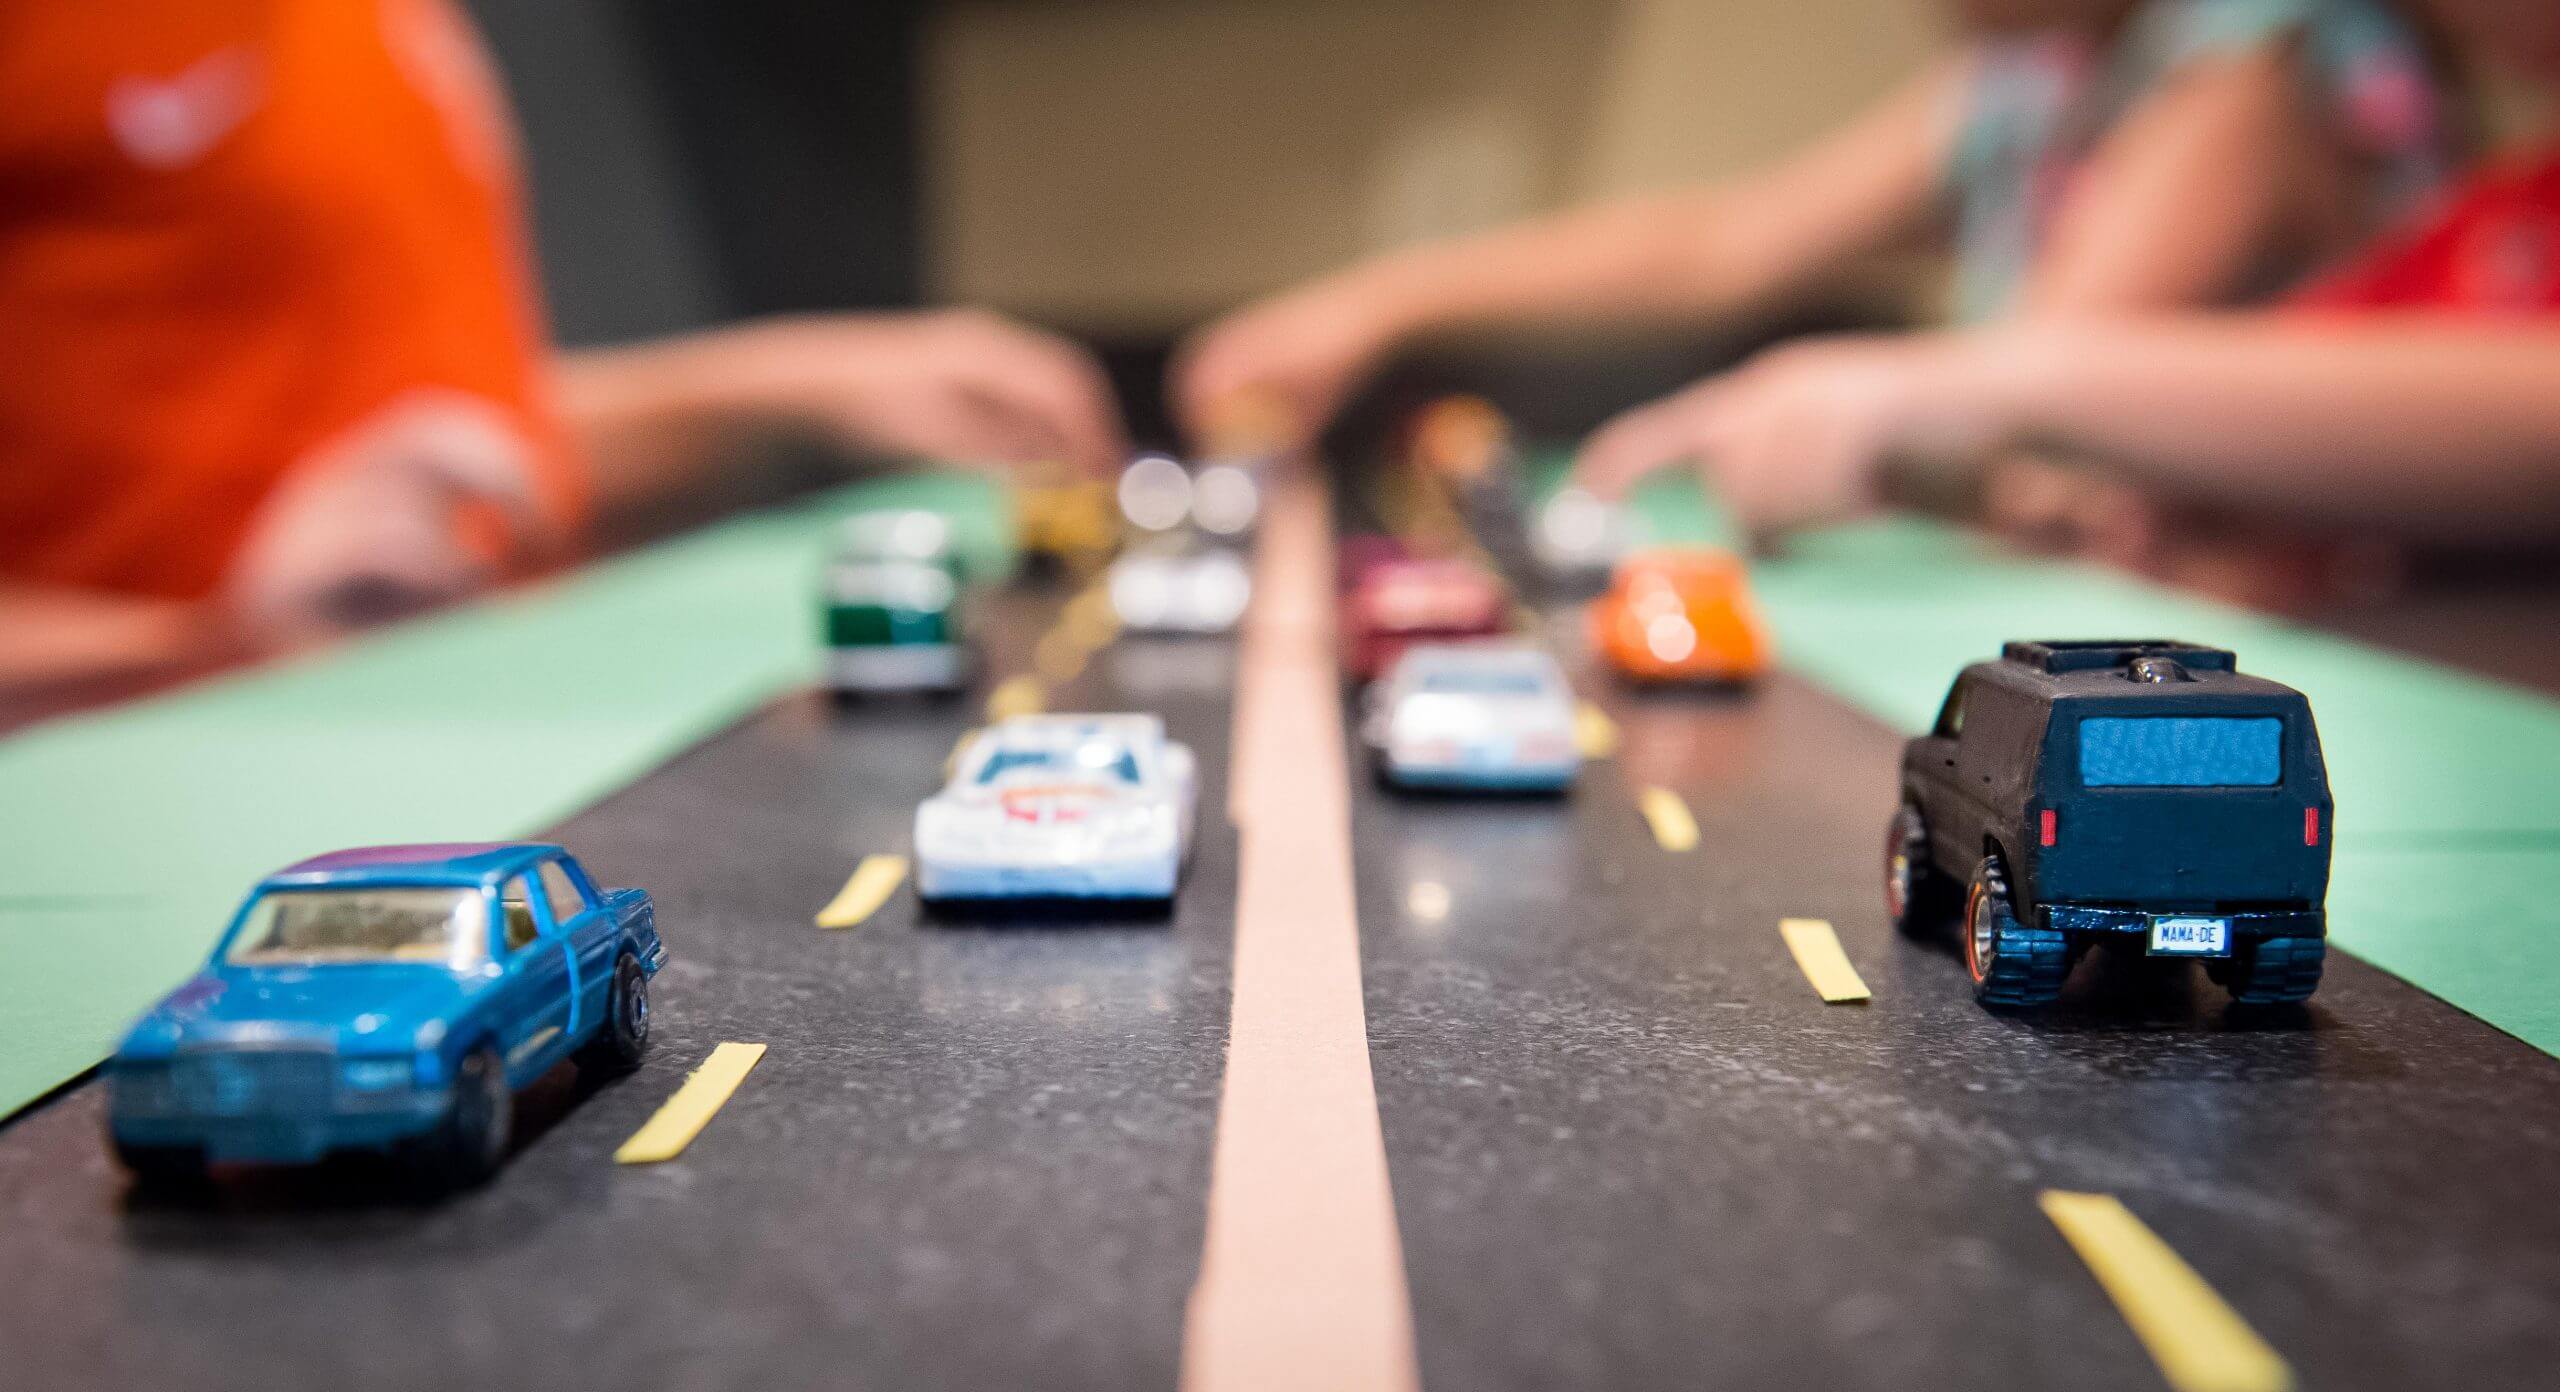 Toy cars are on a road mat. People stand over the road and reach toward the cars.